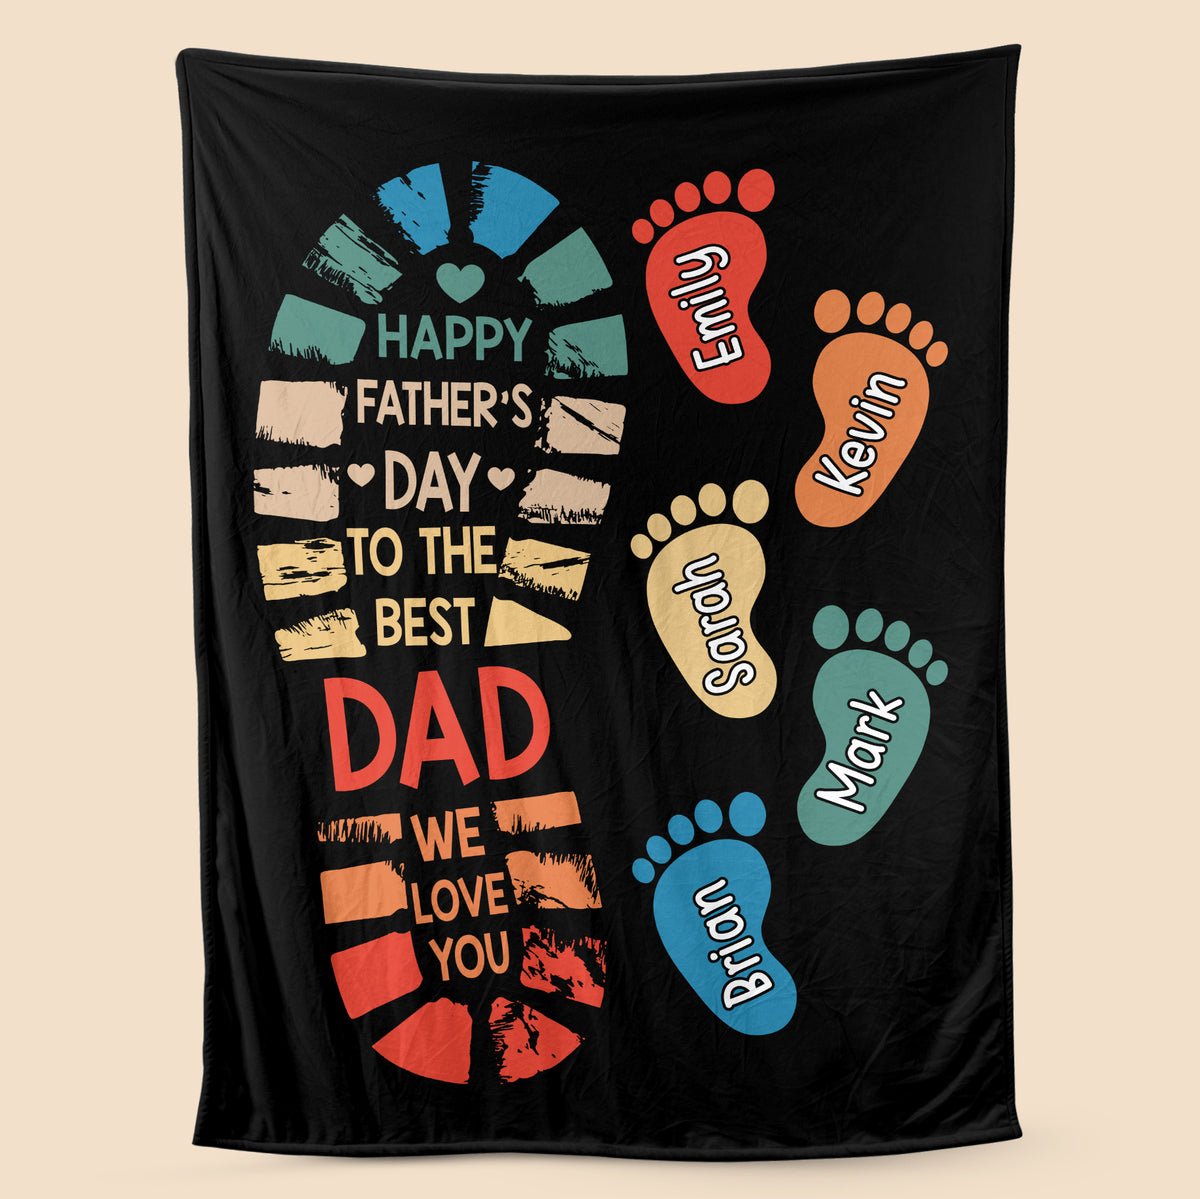 To The Best Dad We Love You - Personalized Blanket - Best Gift For Father - Giftago